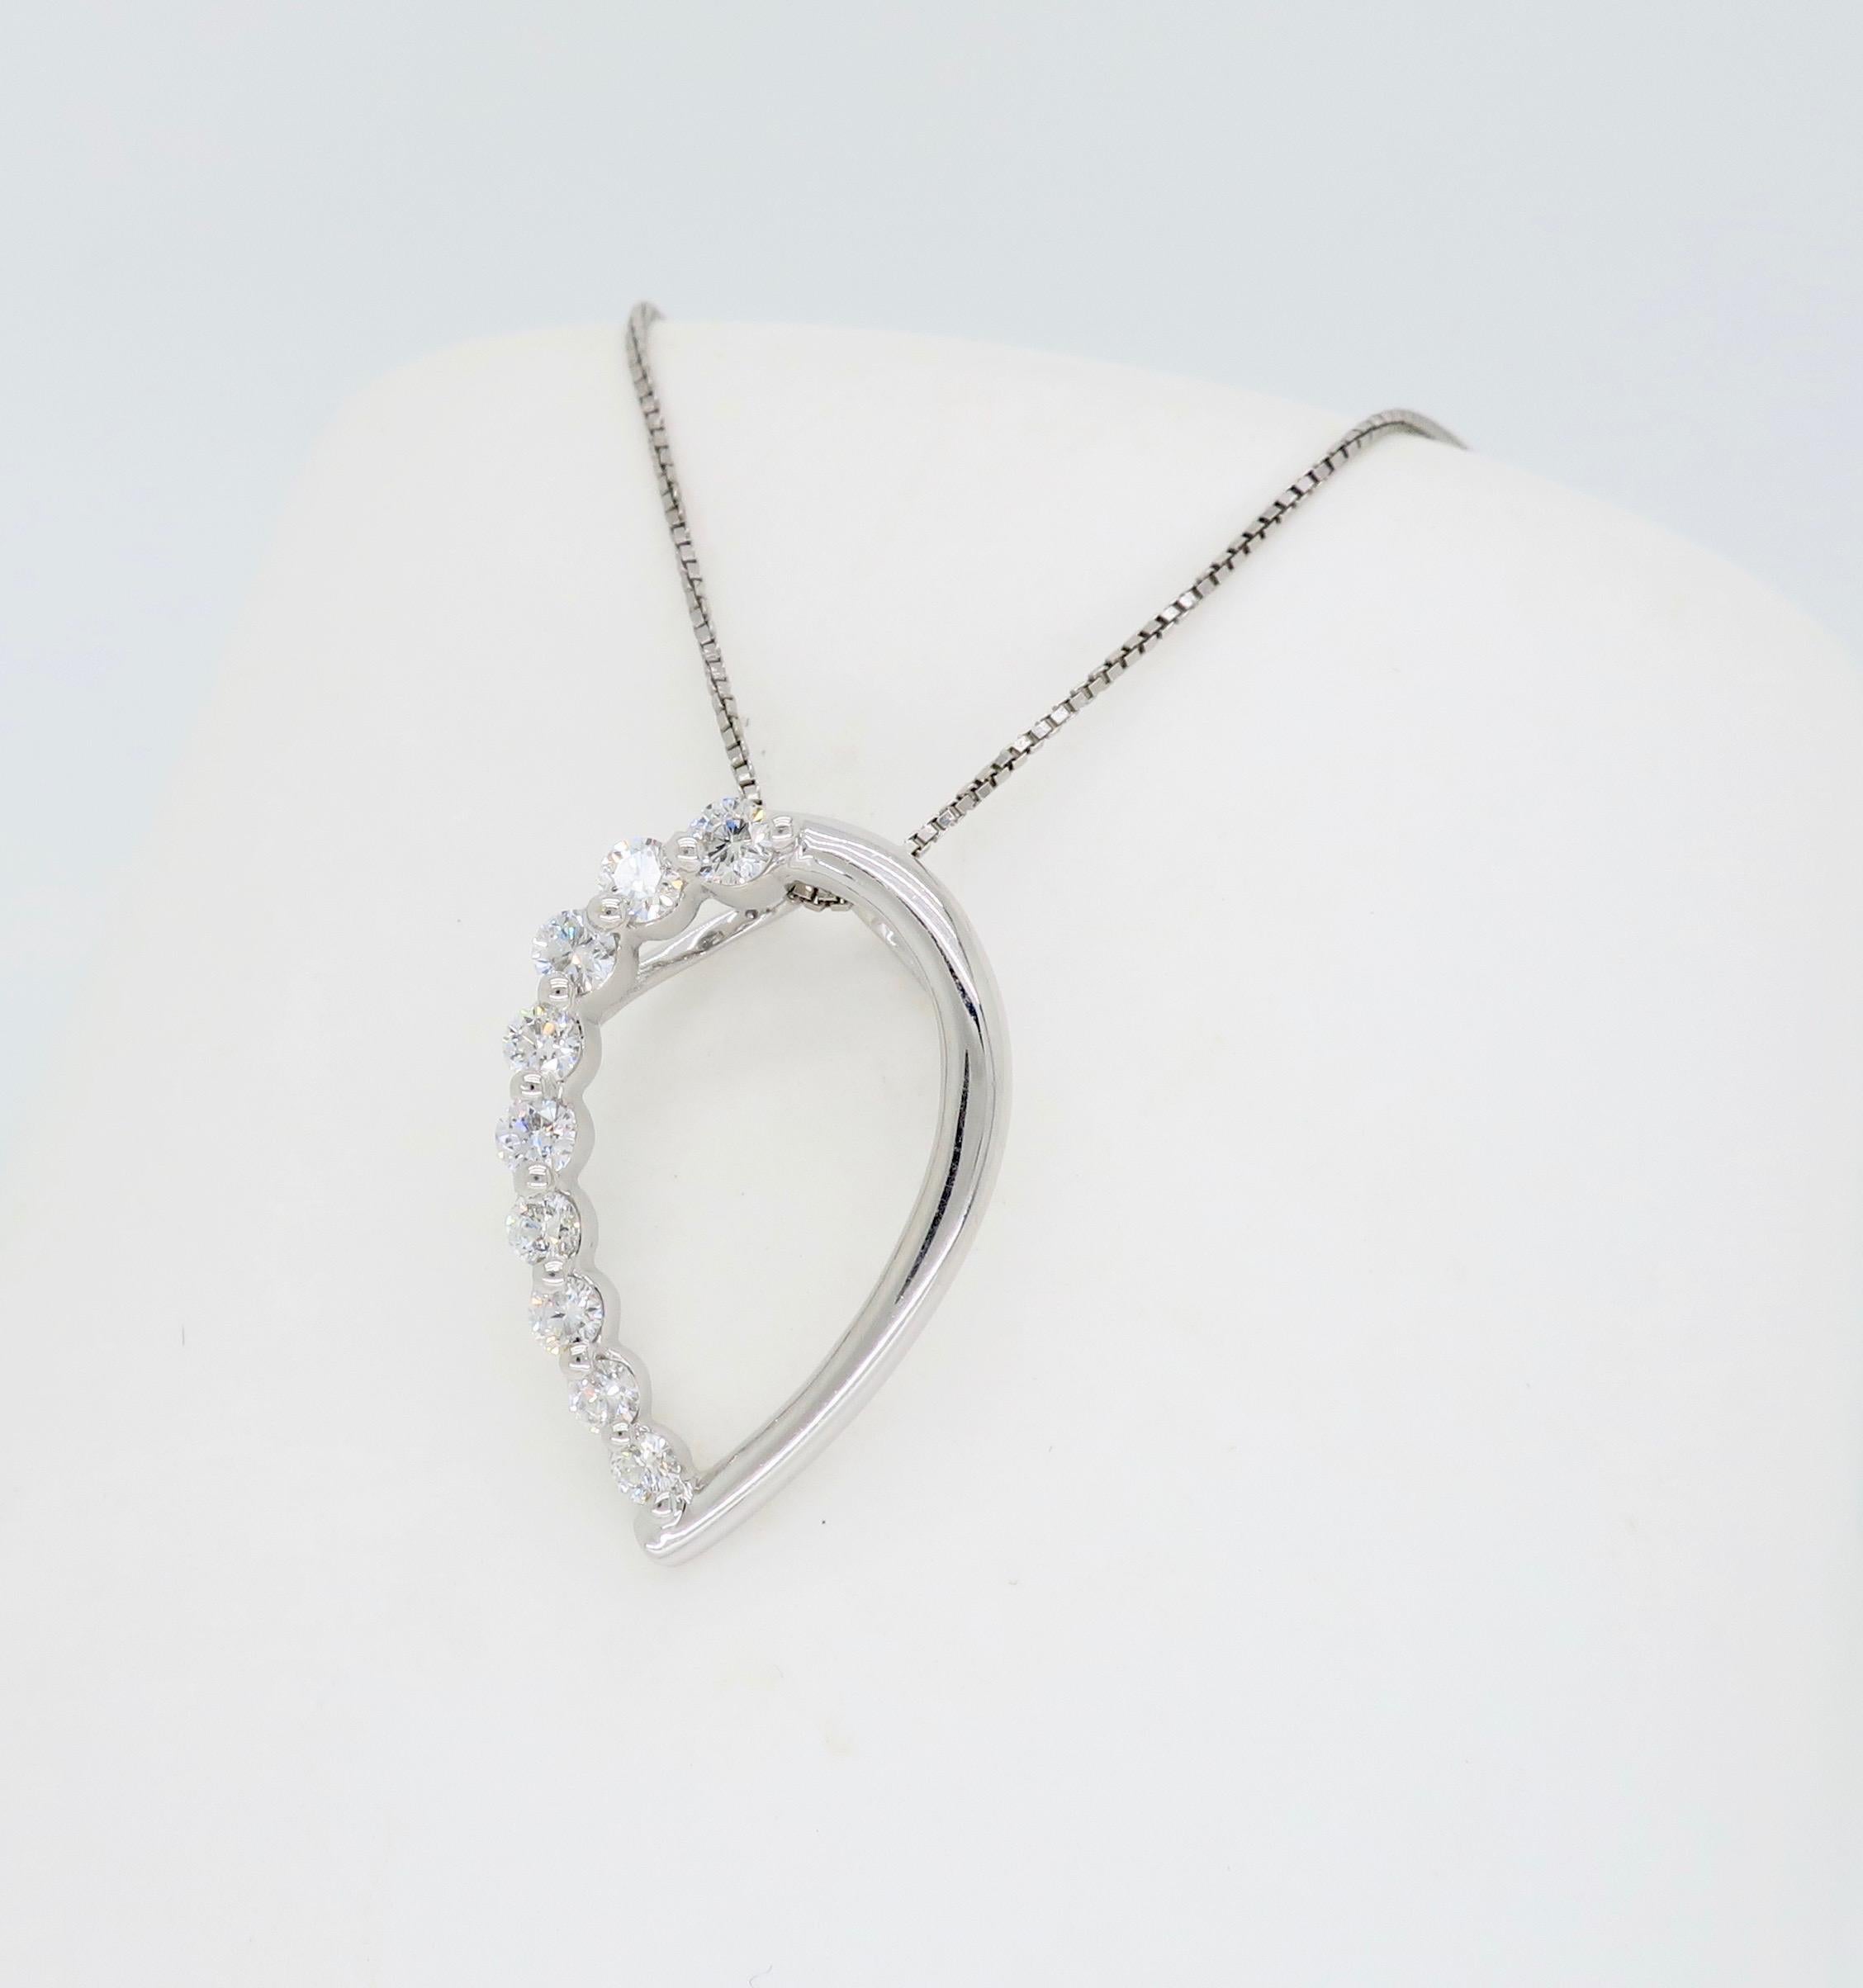 This elegant  white gold necklace features 9 Round Brilliant Cut Diamonds elegantly cascading down one side of the pear shaped pendant.

Diamond Carat Weight: .33CTW
Diamond Cut: 9 Round Brilliant Cut
Color: Average G-I
Clarity: Average SI
Metal: